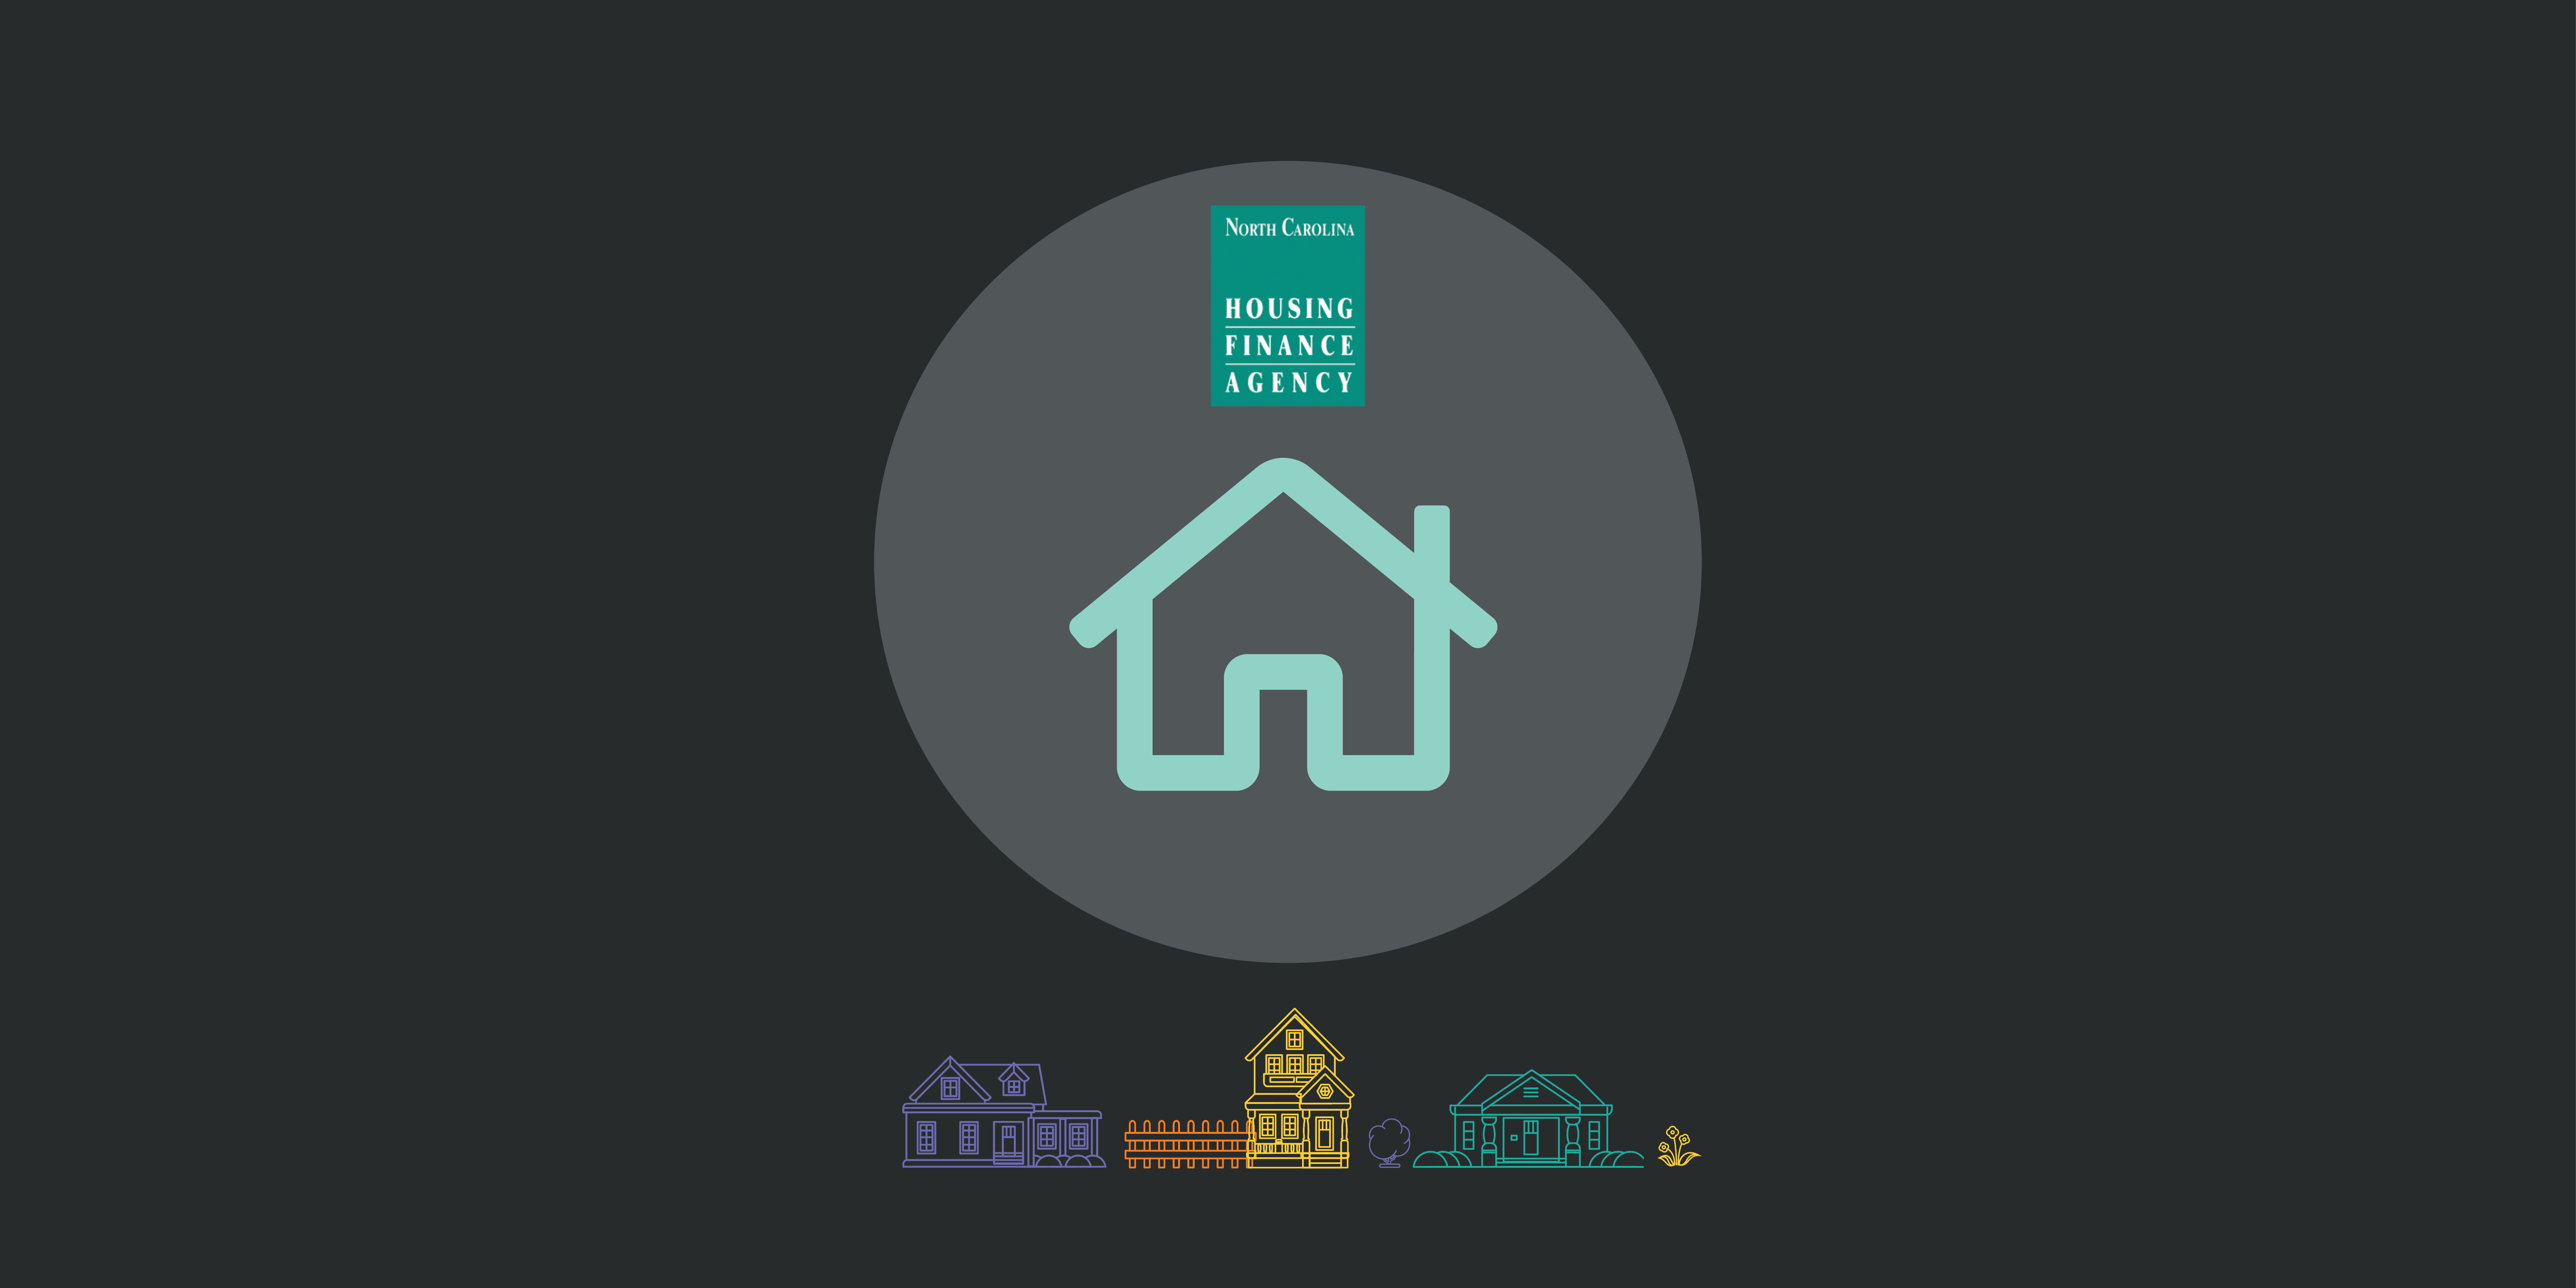 Teal house icon